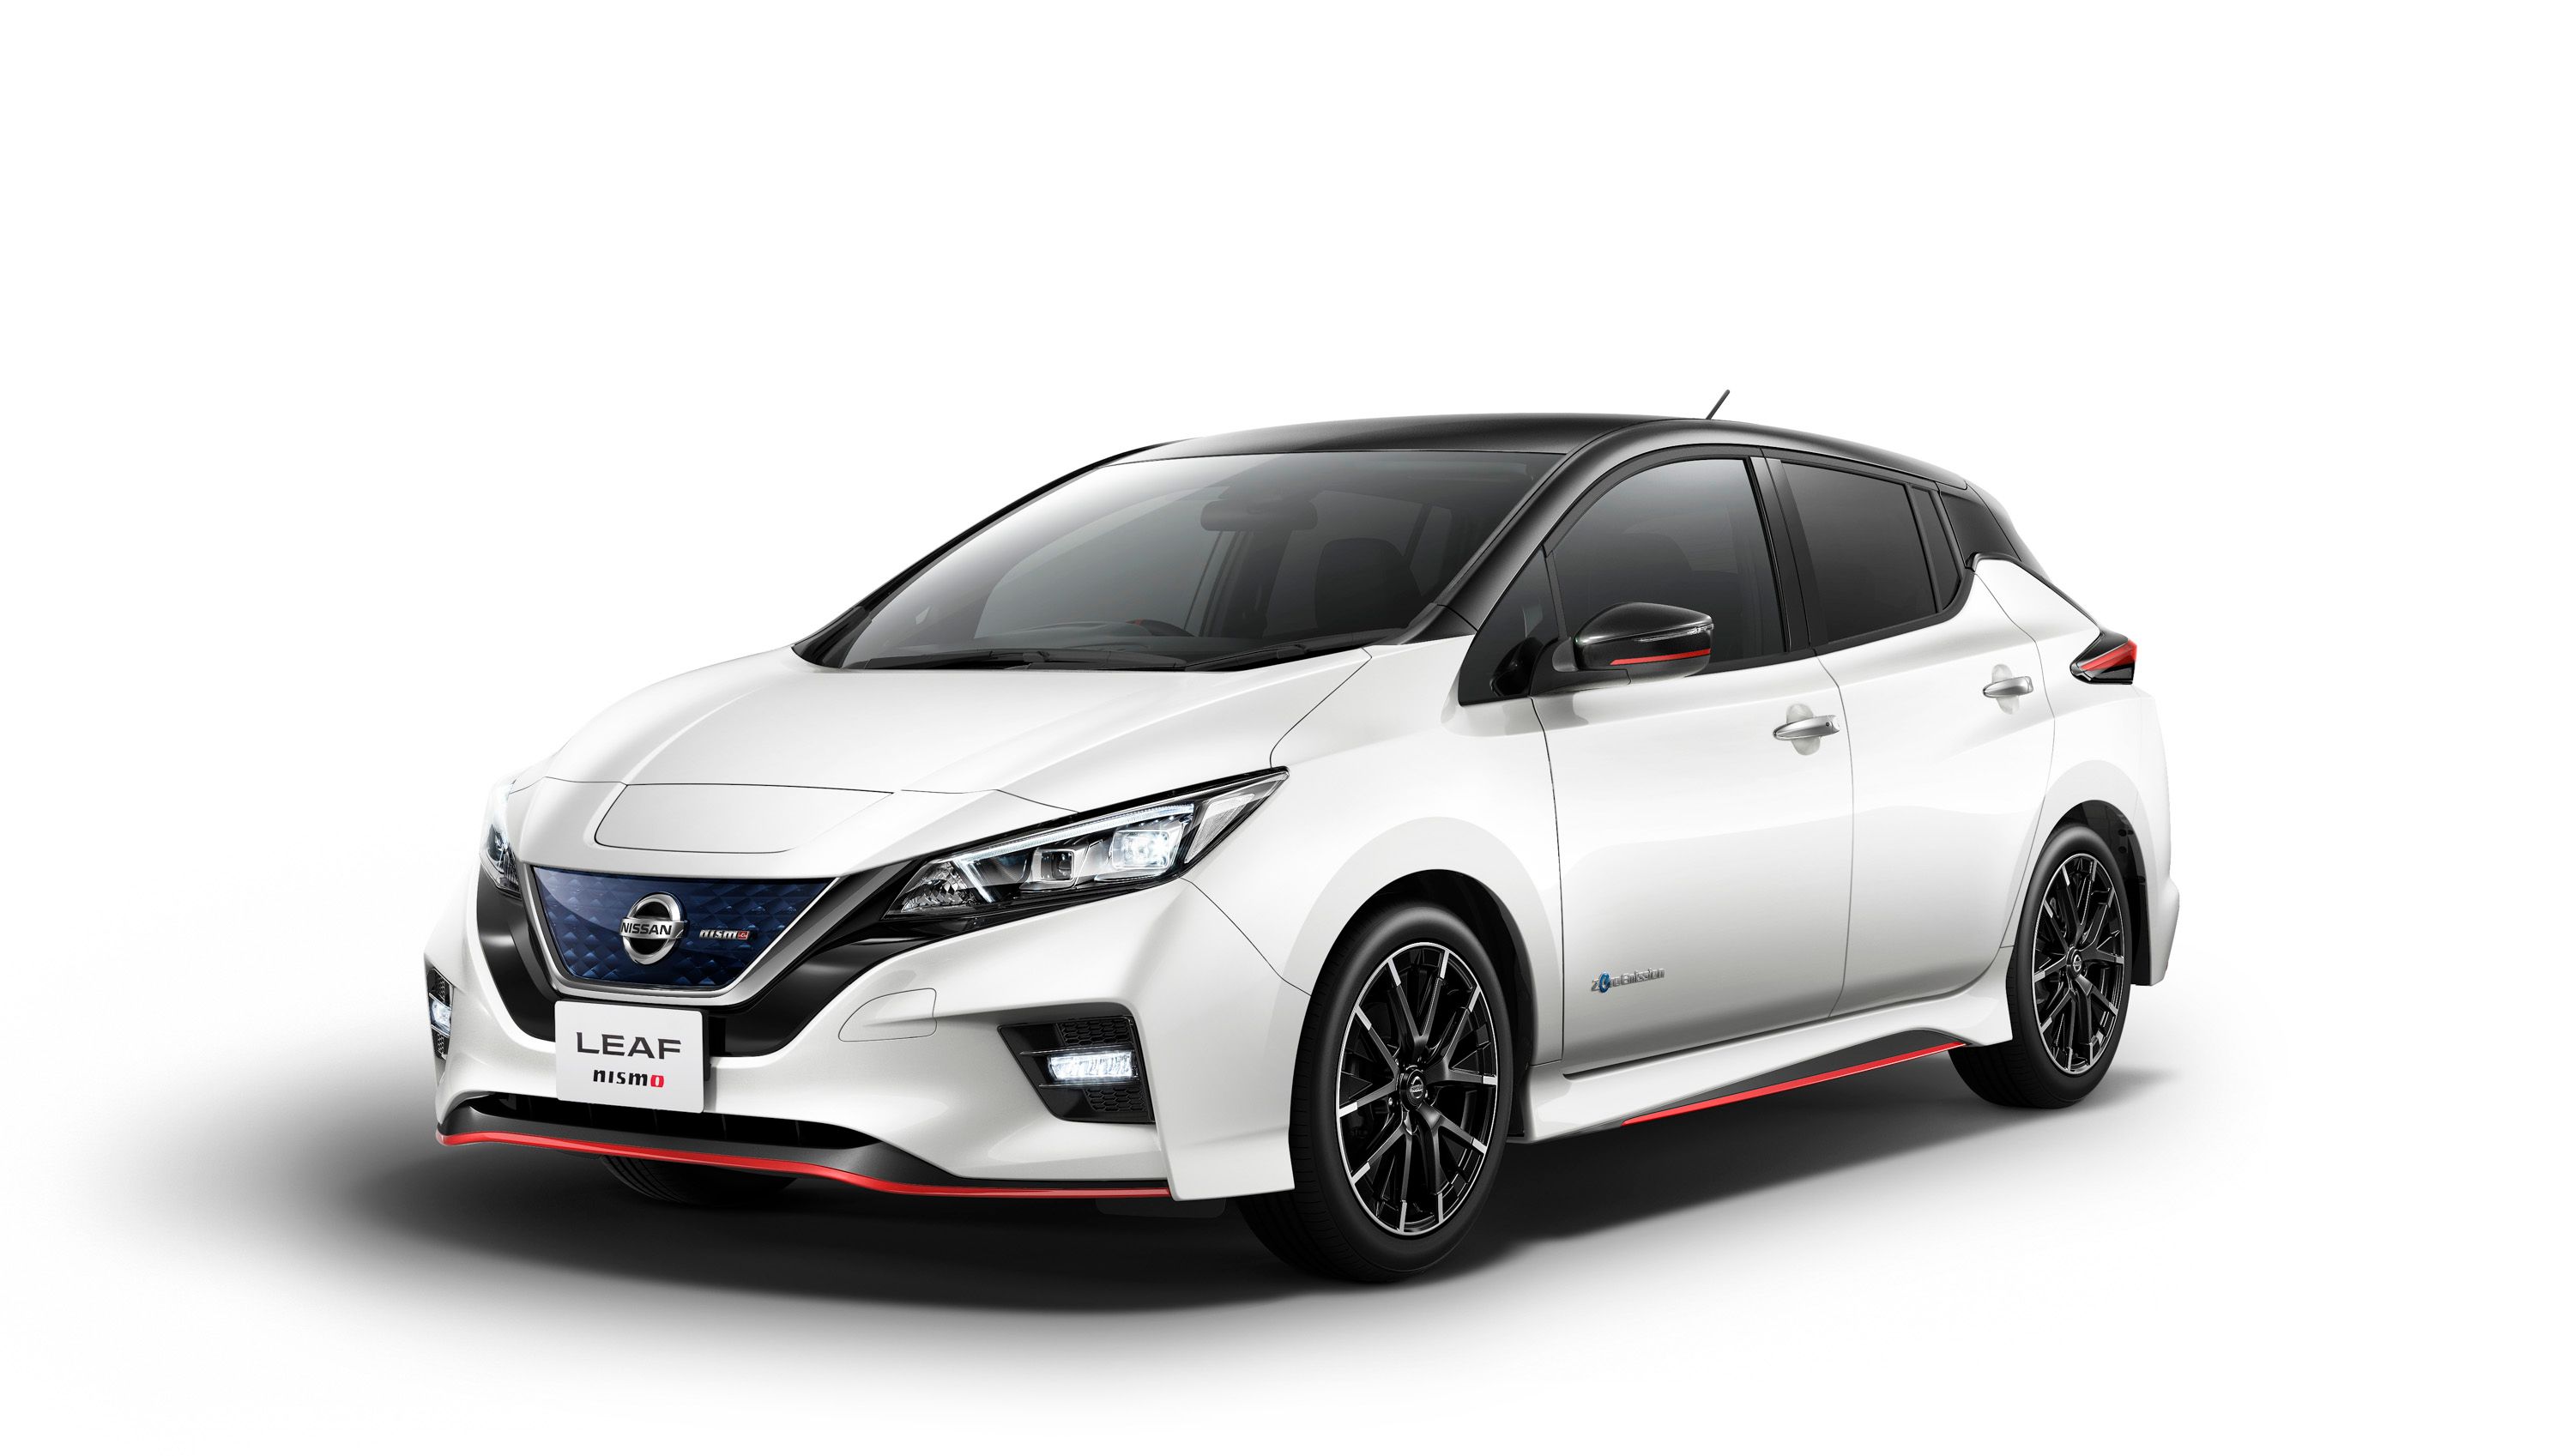 2019 - 2018 The Nissan Leaf Nismo Has Been Unveiled, But It May Leave You Disappointed